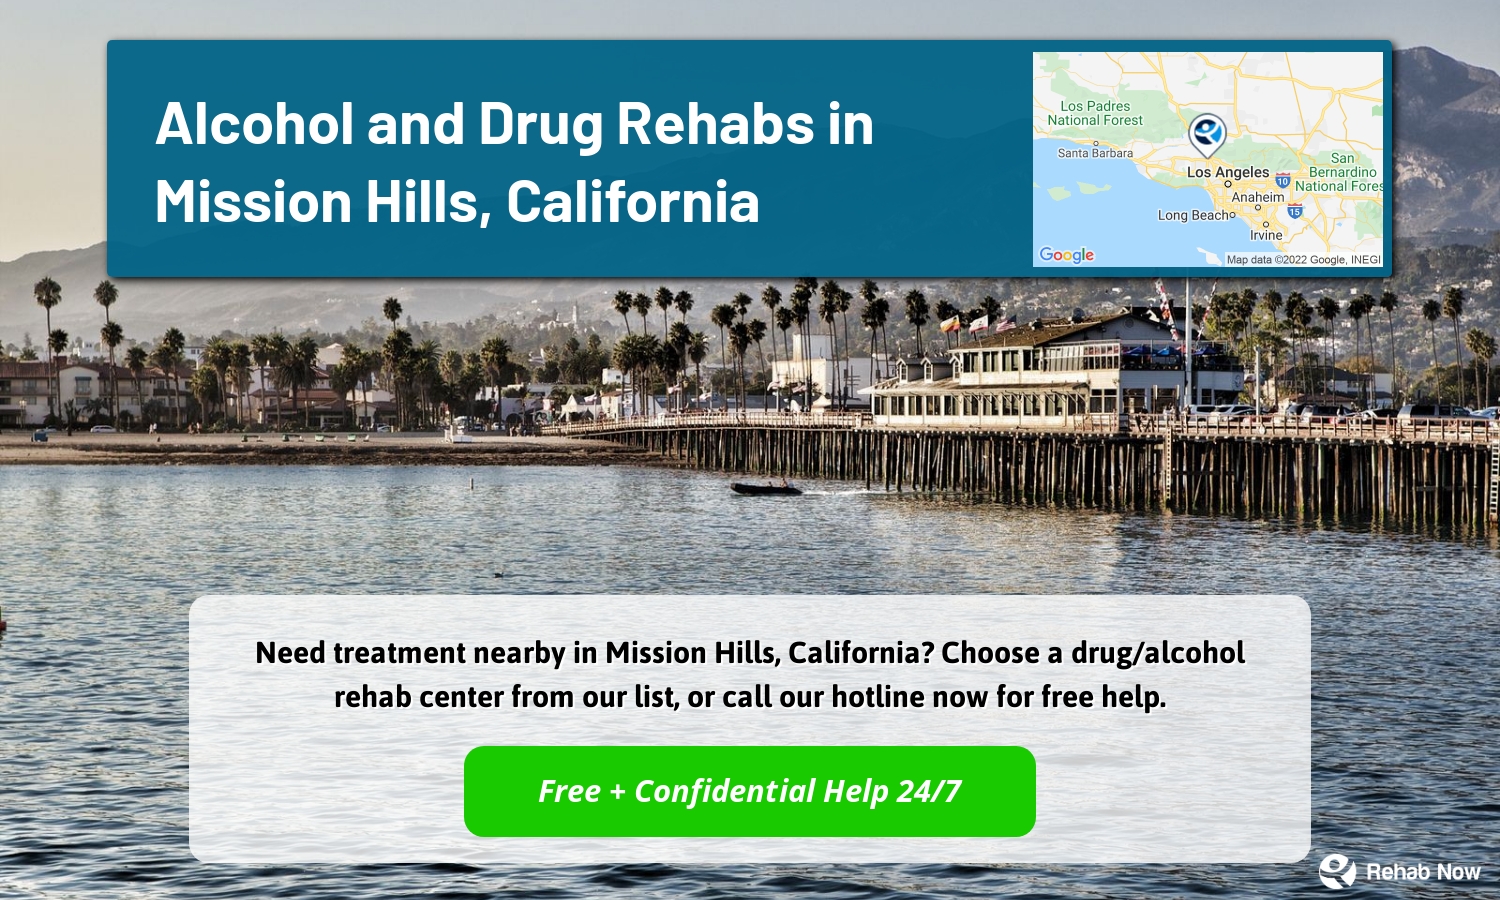 Need treatment nearby in Mission Hills, California? Choose a drug/alcohol rehab center from our list, or call our hotline now for free help.